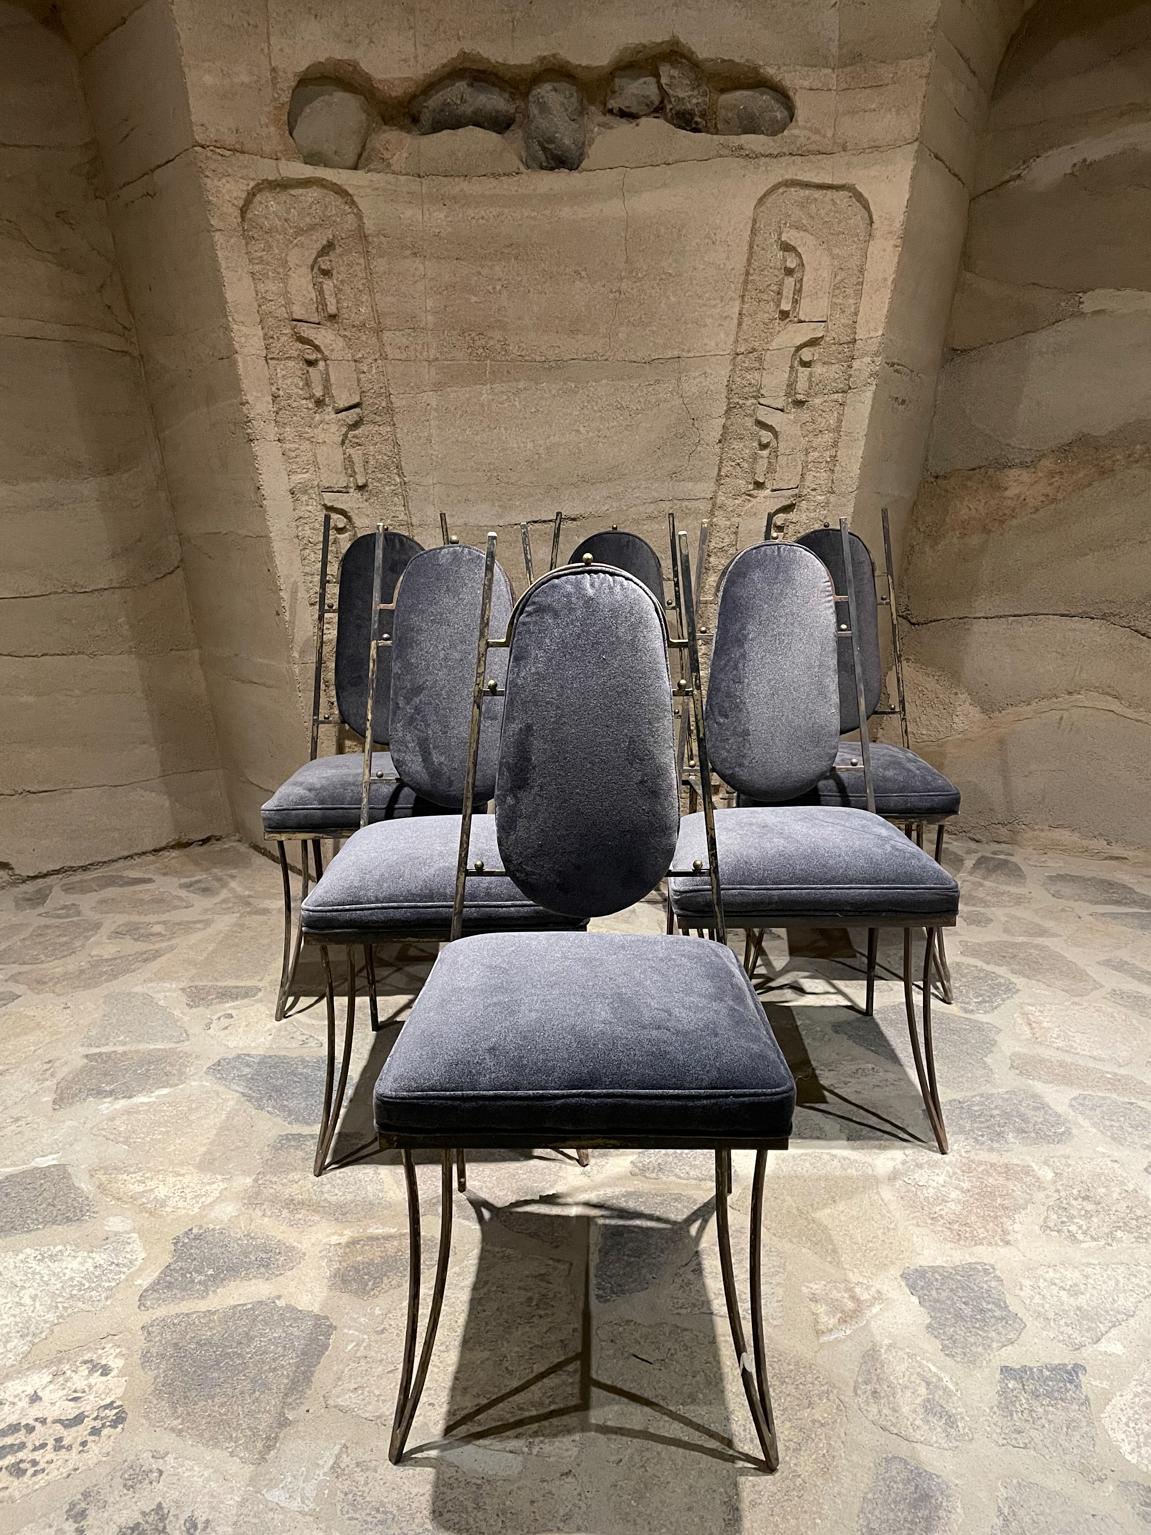 Arturo Pani Elegant Chairs Set of Six Metal with Gray Velvet Mexico City 
1950s Modernism
Fresh new dark gray fabric in a velvety texture
Iron frame is in gilt-gold leaf finish. Worn look. Bronze detailing.
39 tall x 19 d x 17 w Seat 19 h
Preowned